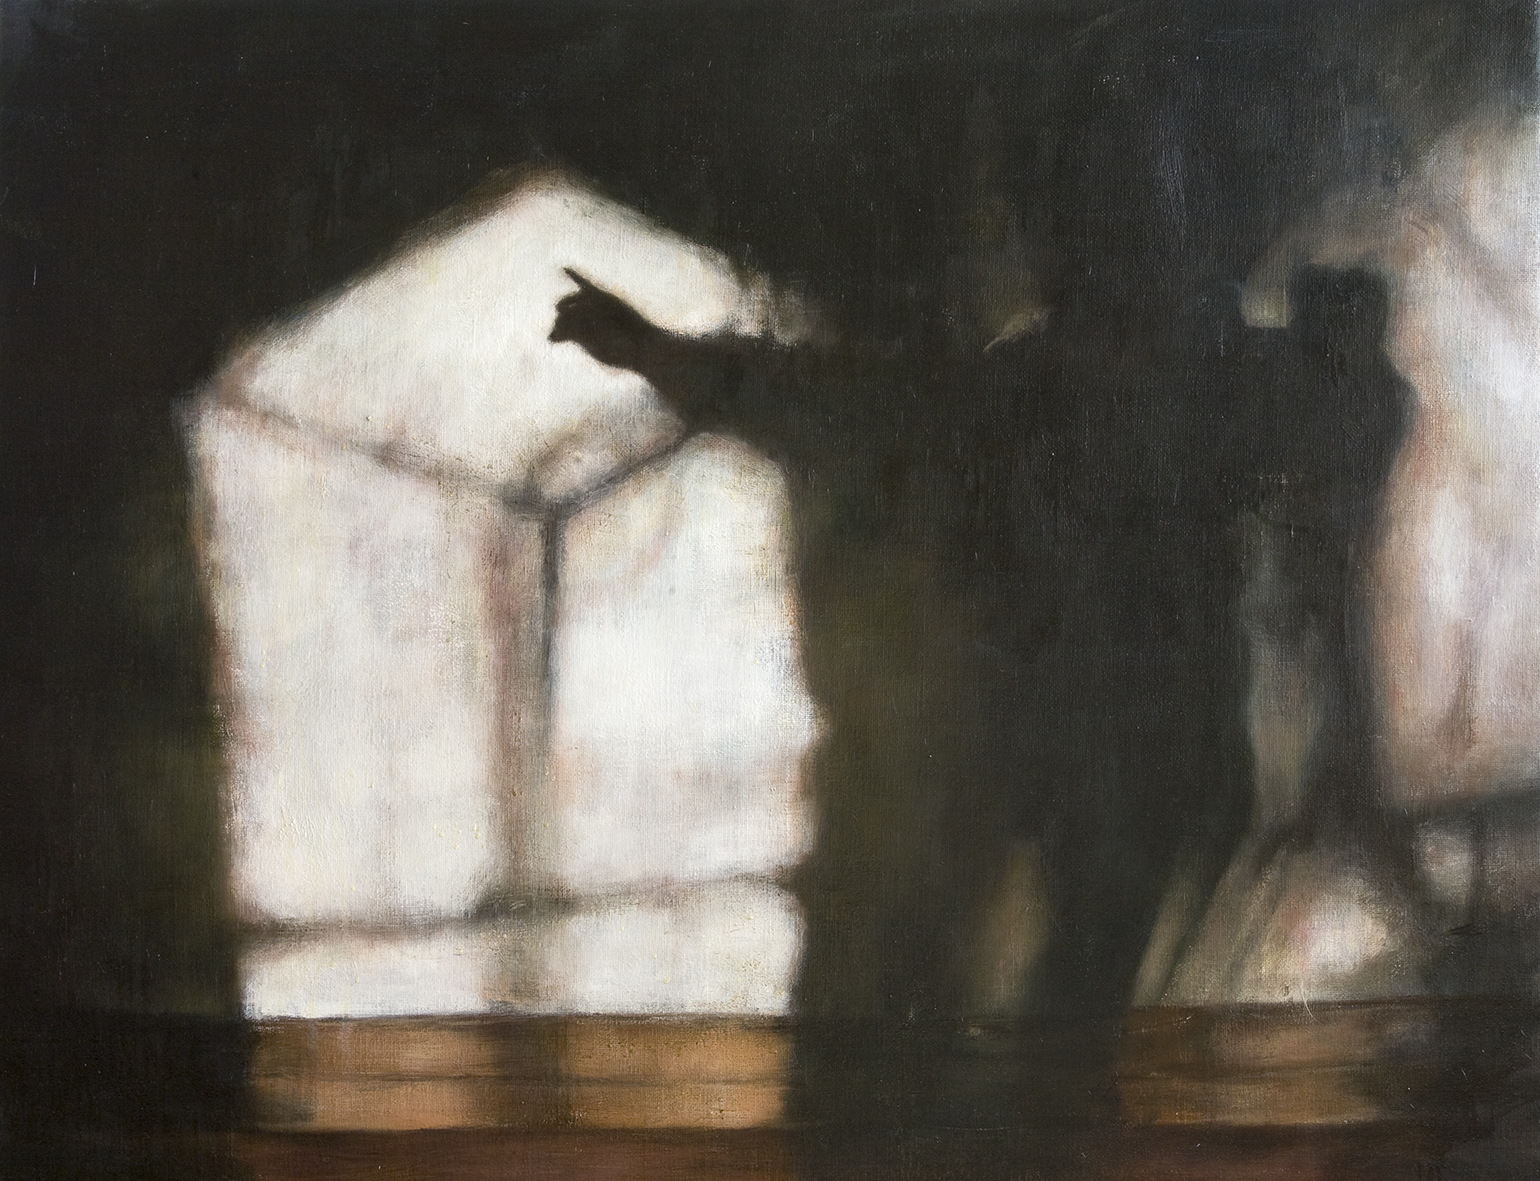   Interior from home II   Oil on canvas 81 x 100 cm 2008  